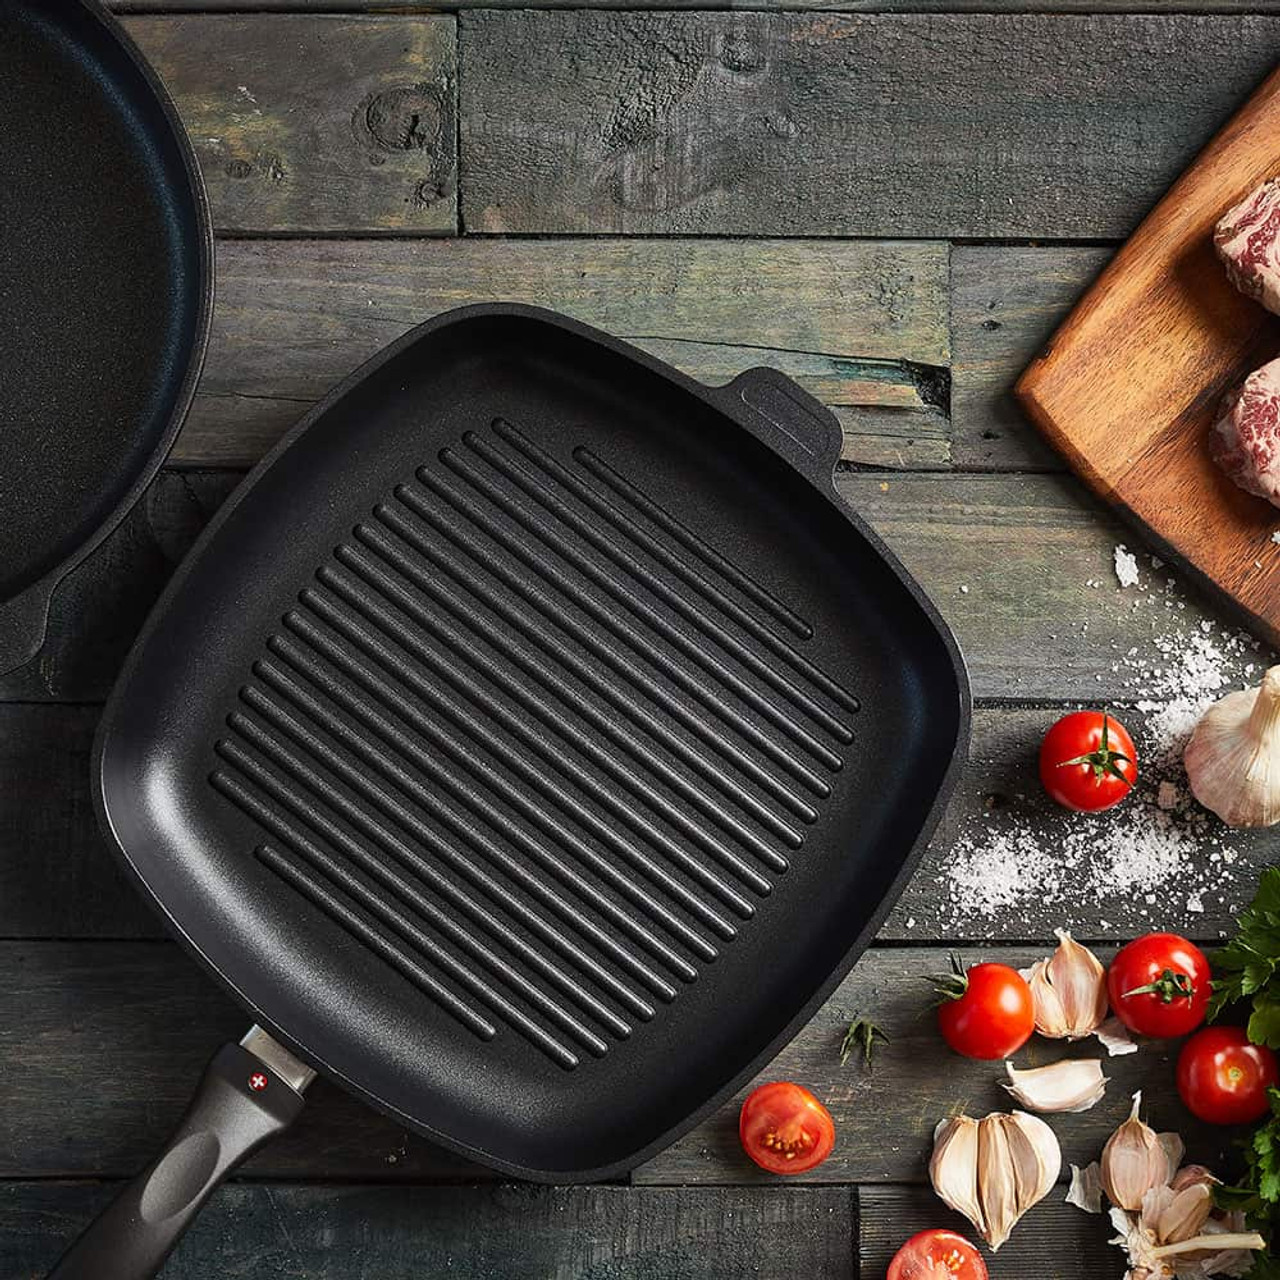 https://cdn11.bigcommerce.com/s-hccytny0od/images/stencil/1280x1280/products/3625/12924/swiss-diamond-xd-nonstick-square-grill-pan-2__34897.1601482336.jpg?c=2?imbypass=on